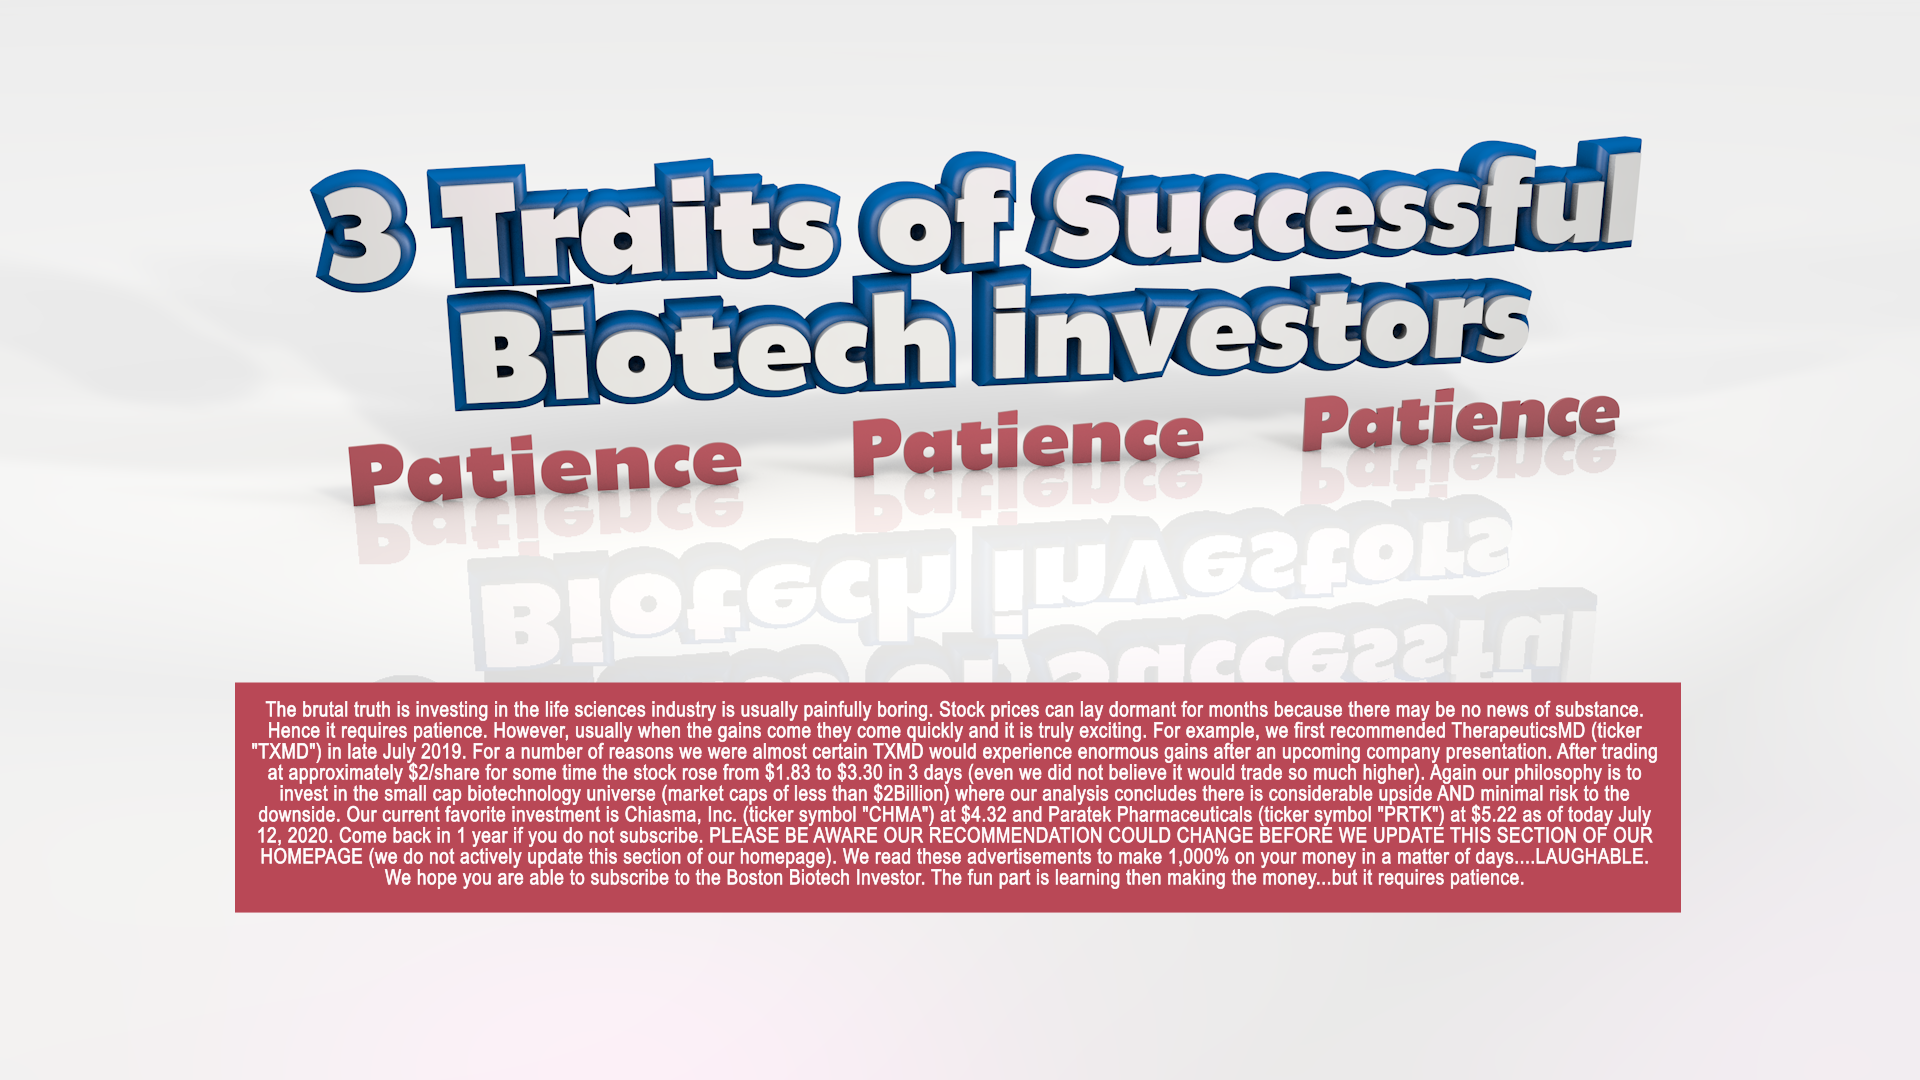 Biotech investing takes patience